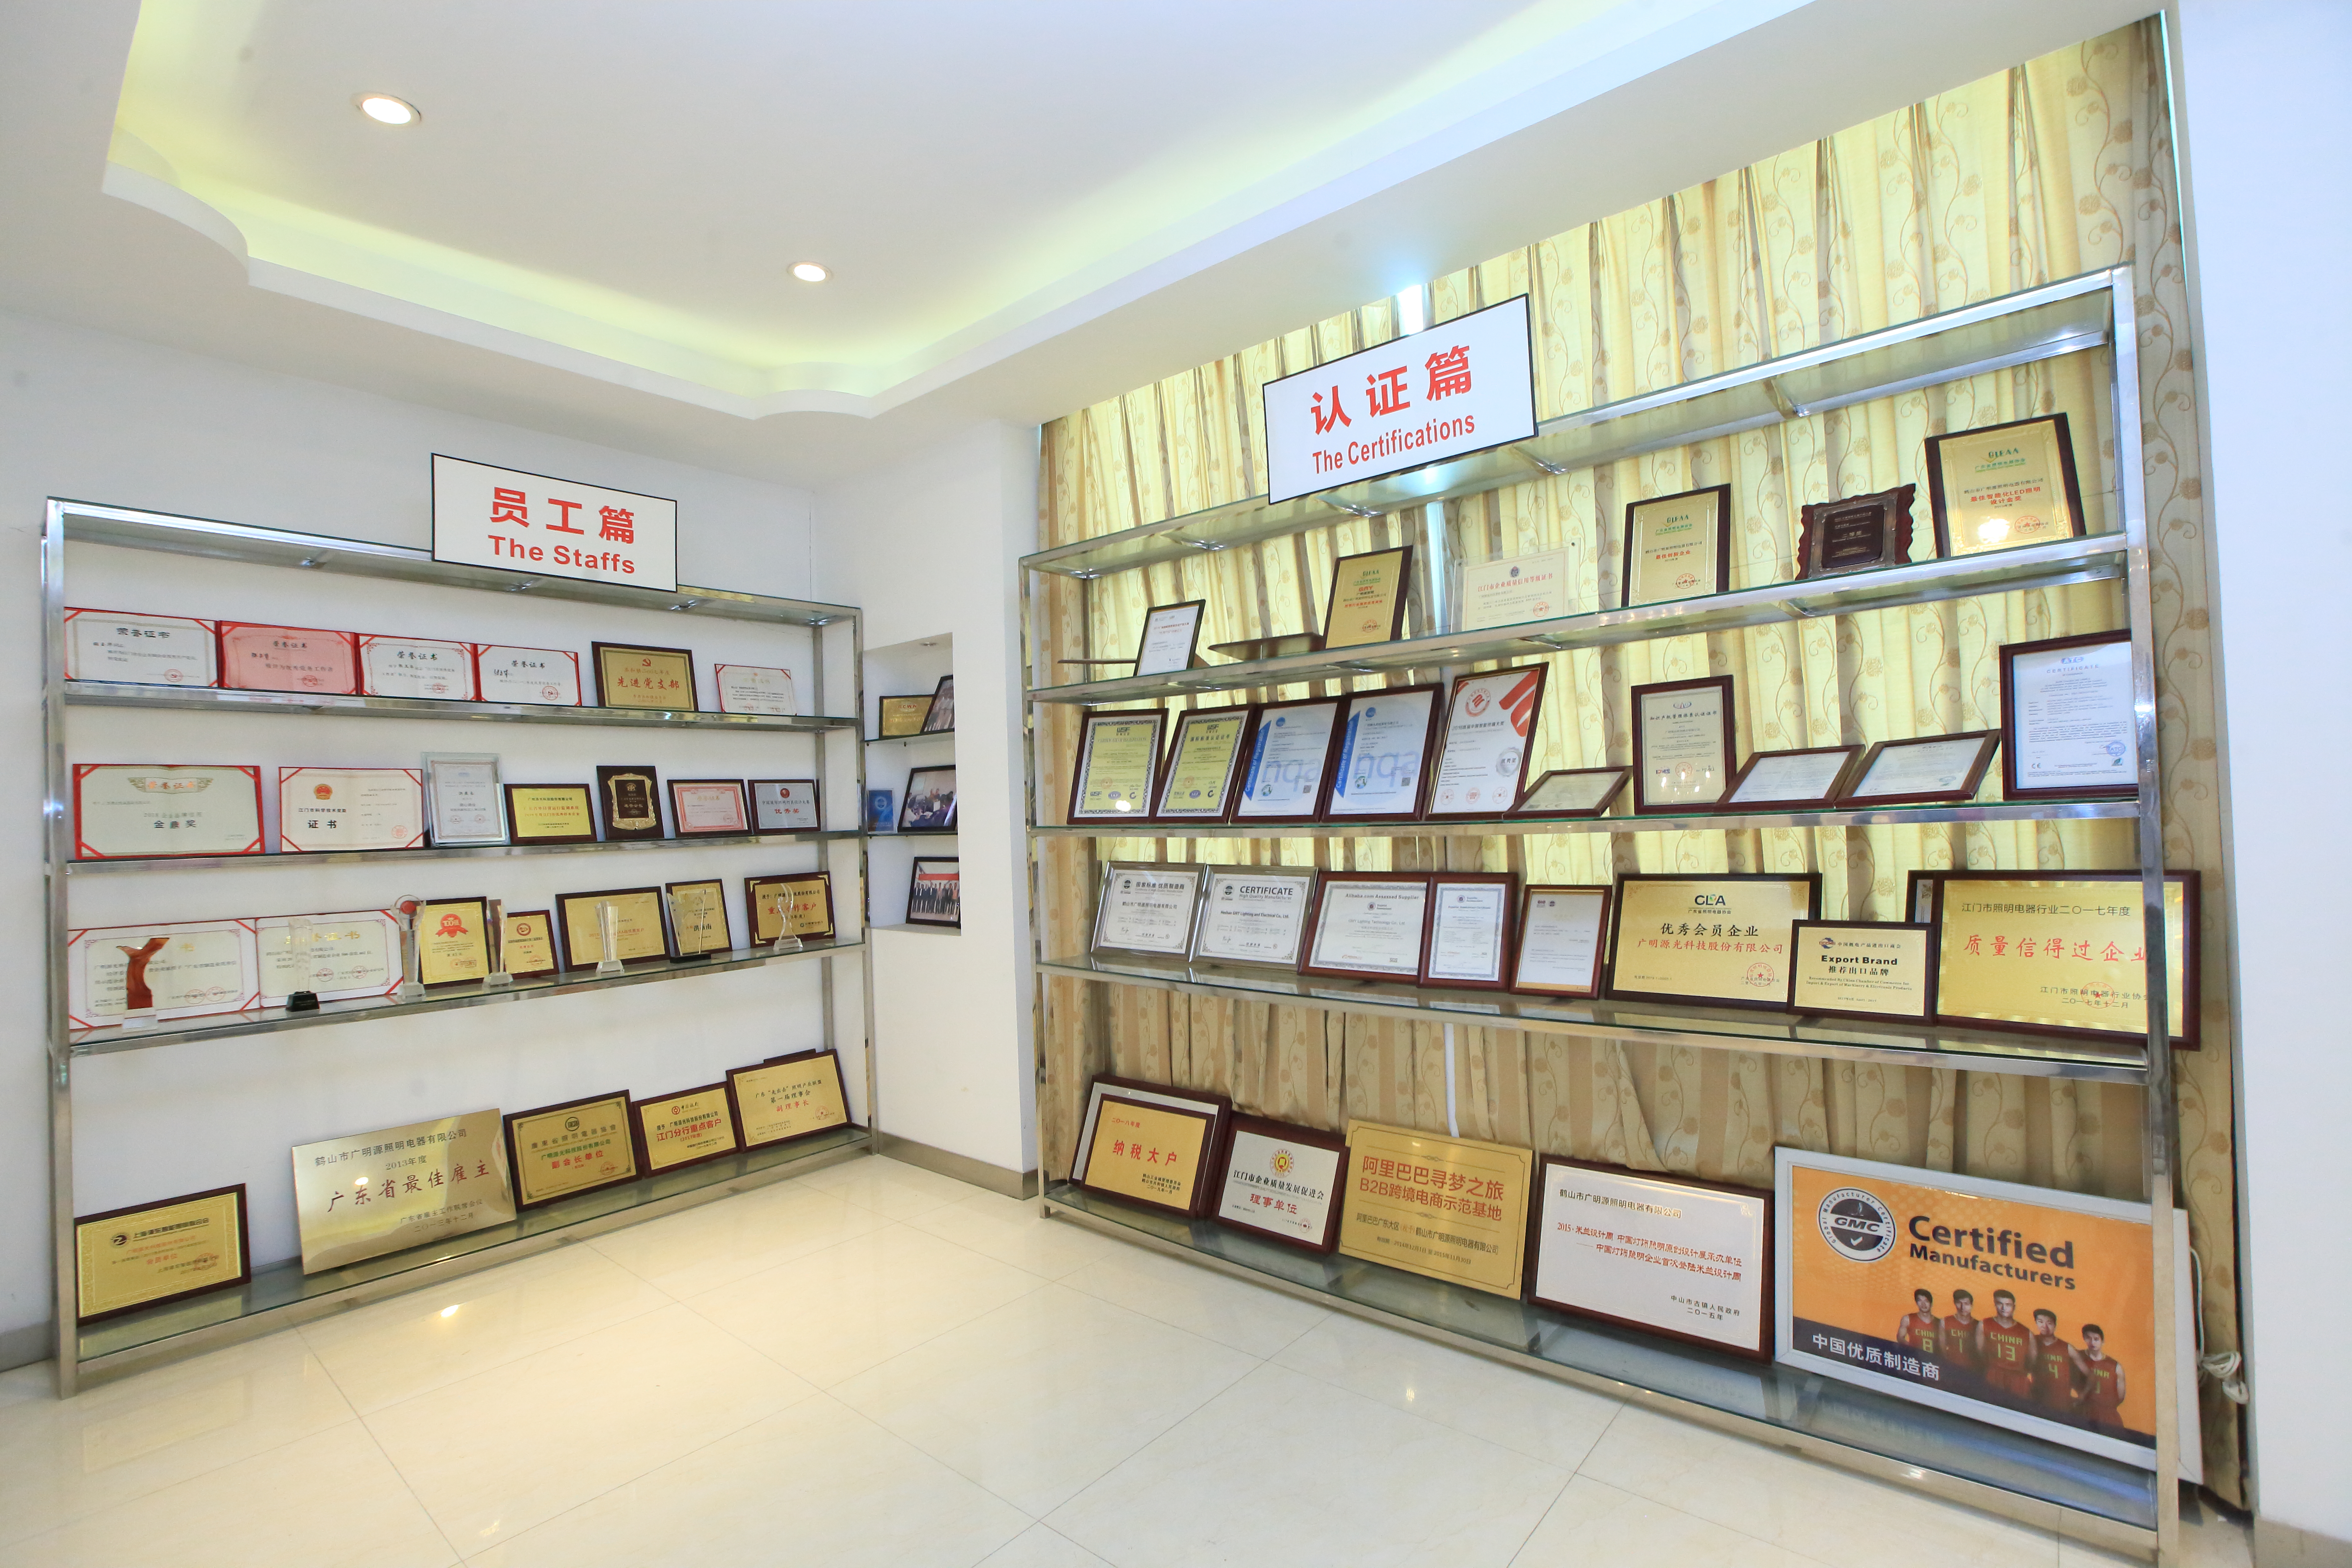 Awards from lighting customers of lights manufactured by GMY technology